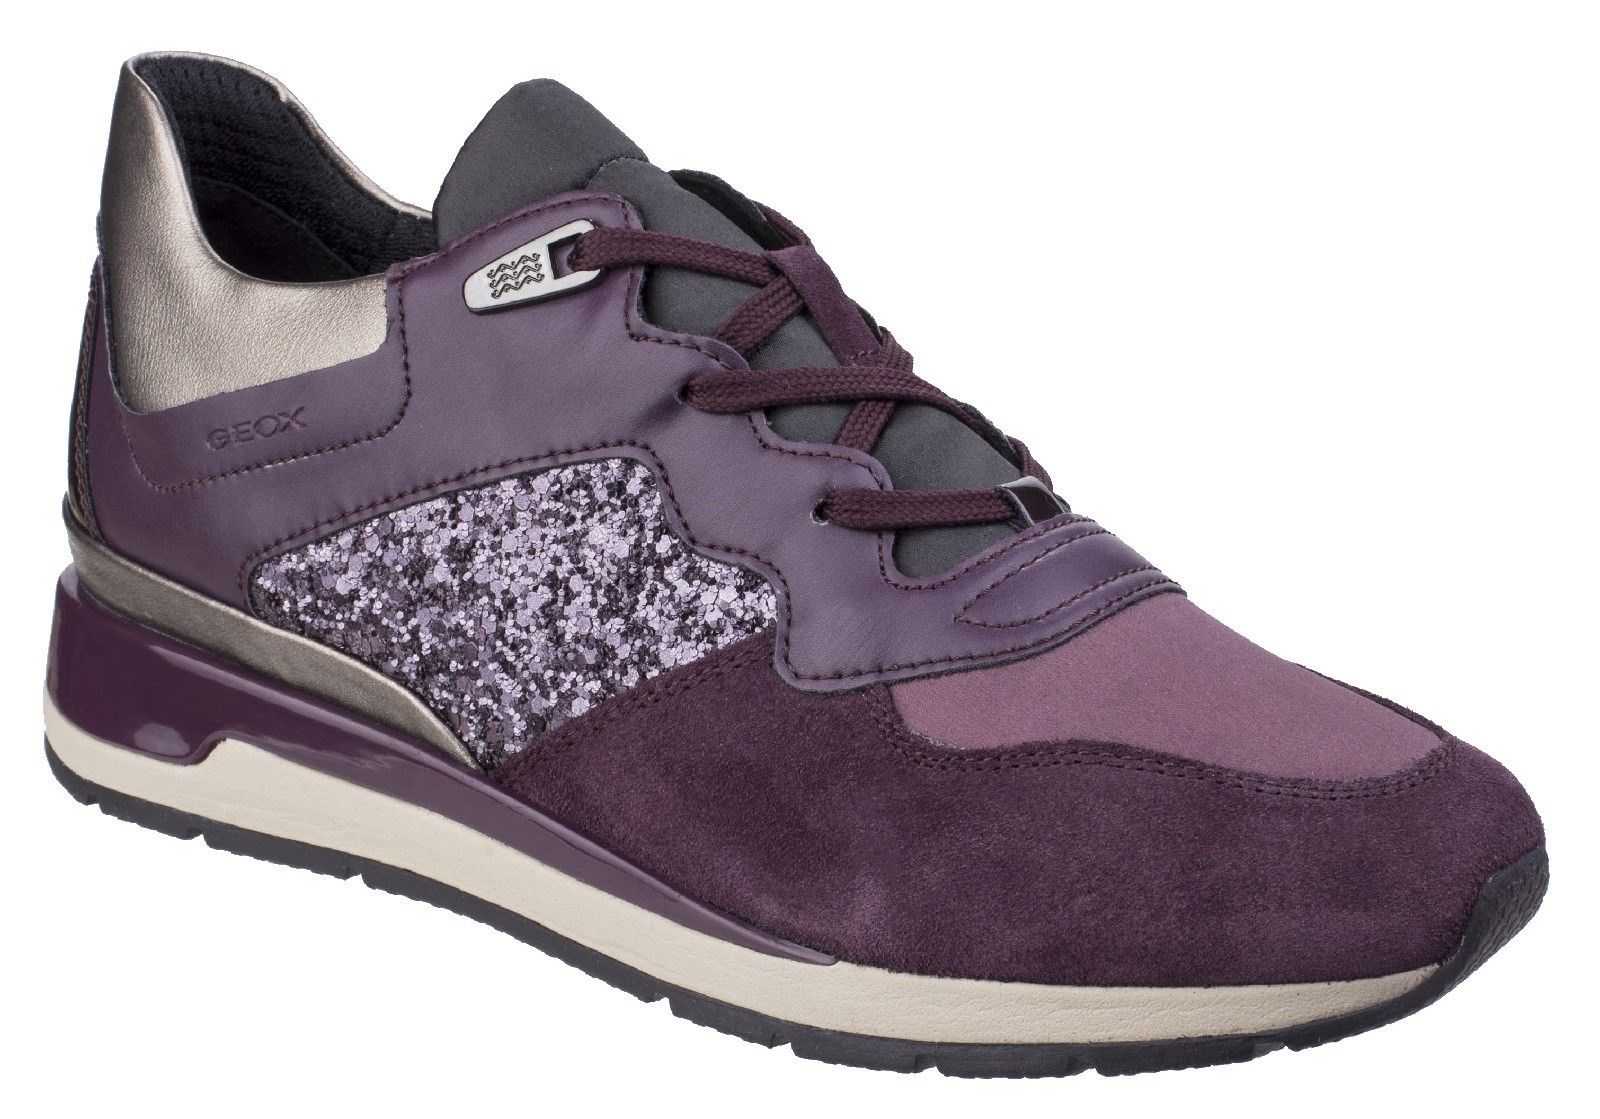 Women's sneakers for everyday casual occasions. Geox patented perforated sole for breathability and performance. Stylish upper with patent leather. Removable insole for a comfortable fit. Lightweight outsole for extreme cushioning and flexibility.Essential. 
Comfort Fit. 
Versatile. 
Anti-Slip Outsole.